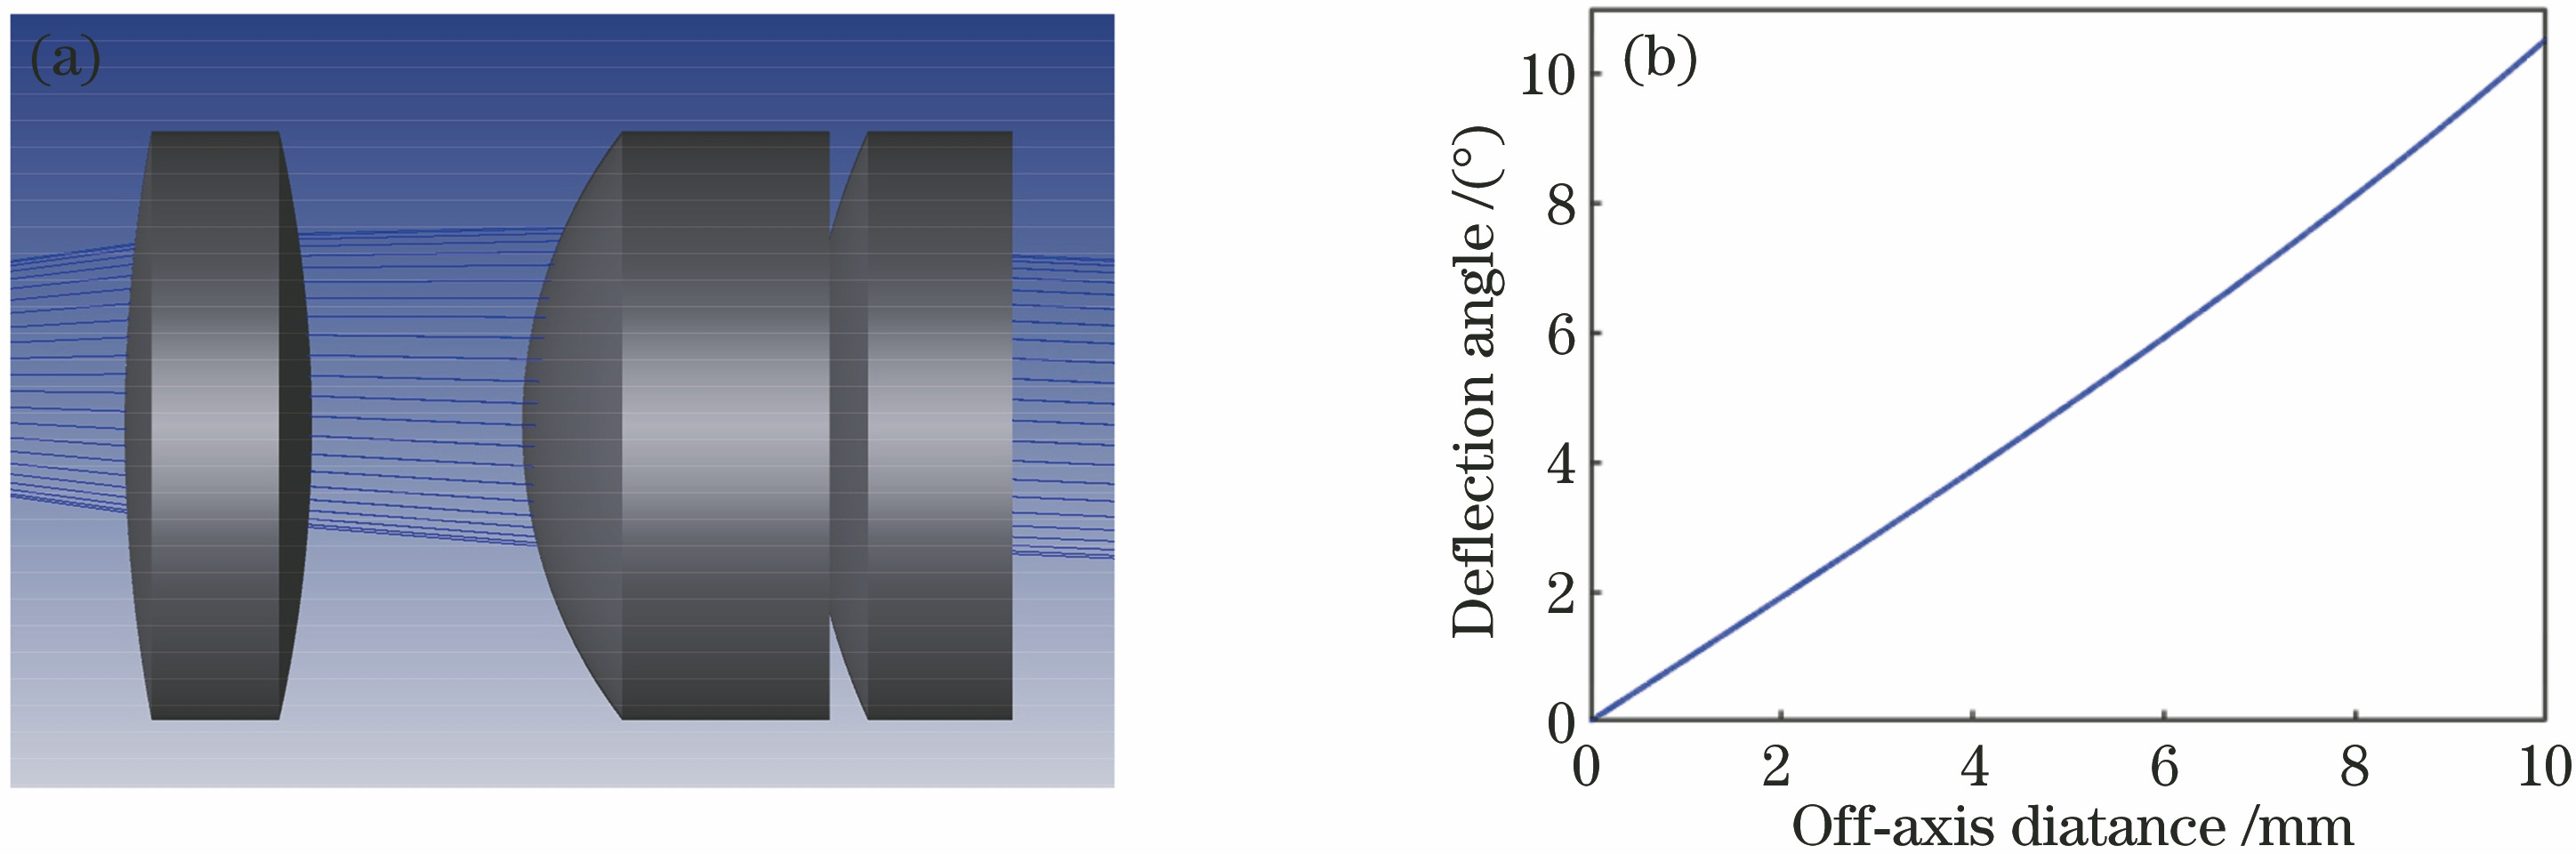 Lens group and beam deflection. (a) Schematic of lens group; (b) beam deflection at different off-axis distances